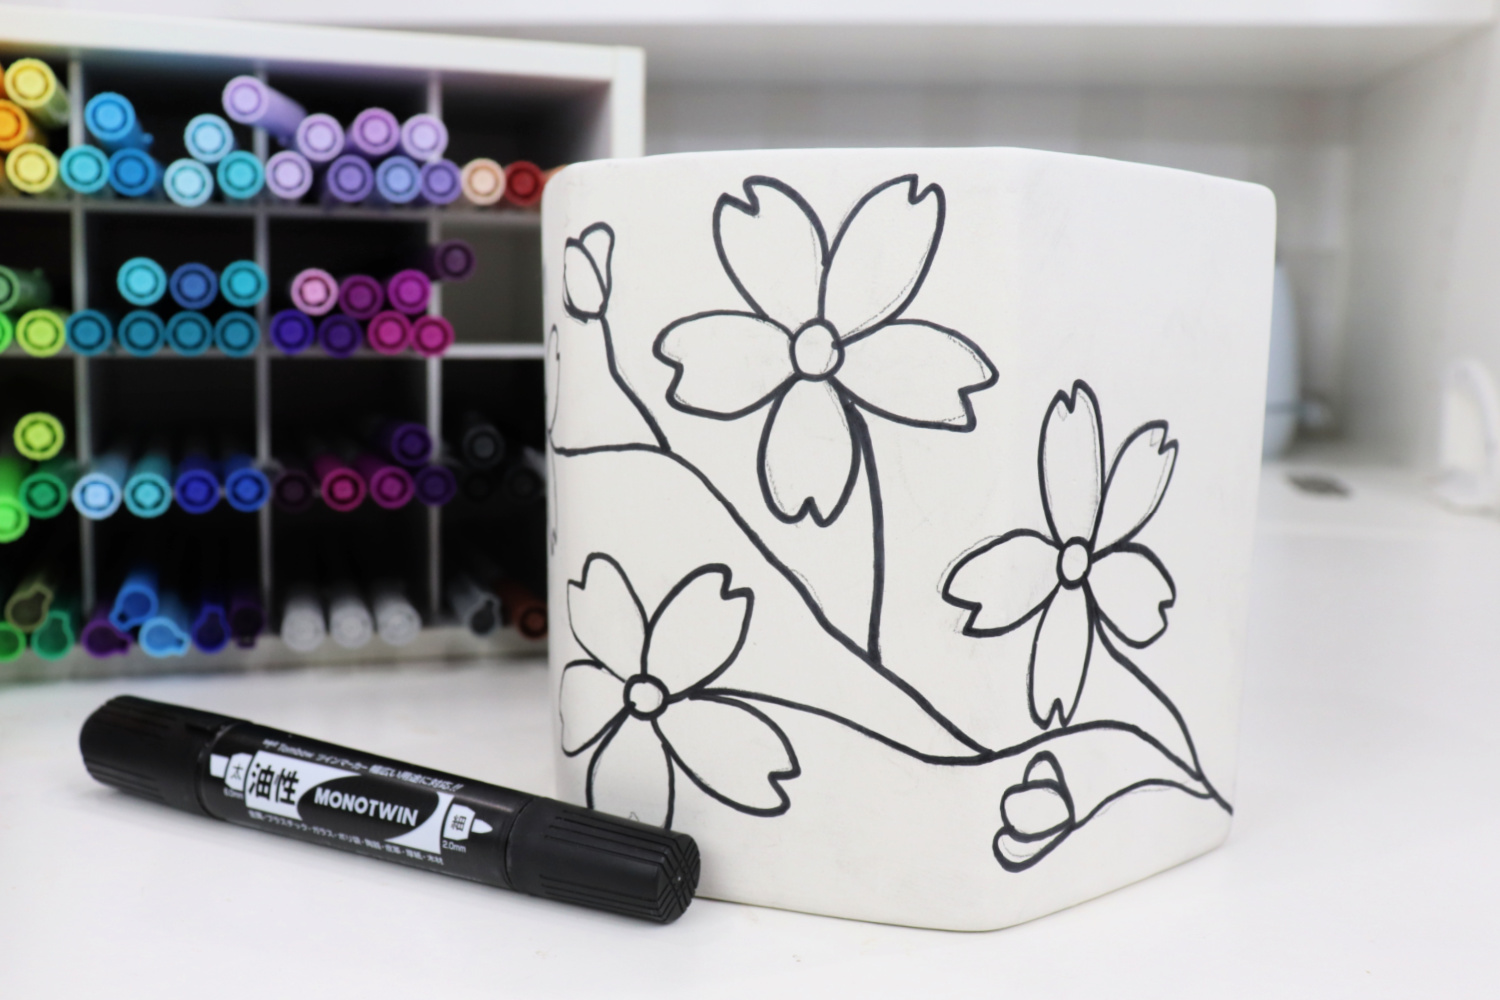 Image contains a white planter decorated with cherry blossom art outlined in black marker, sitting on a white table. A black permanent marker and an organizer full of colored markers sit nearby.